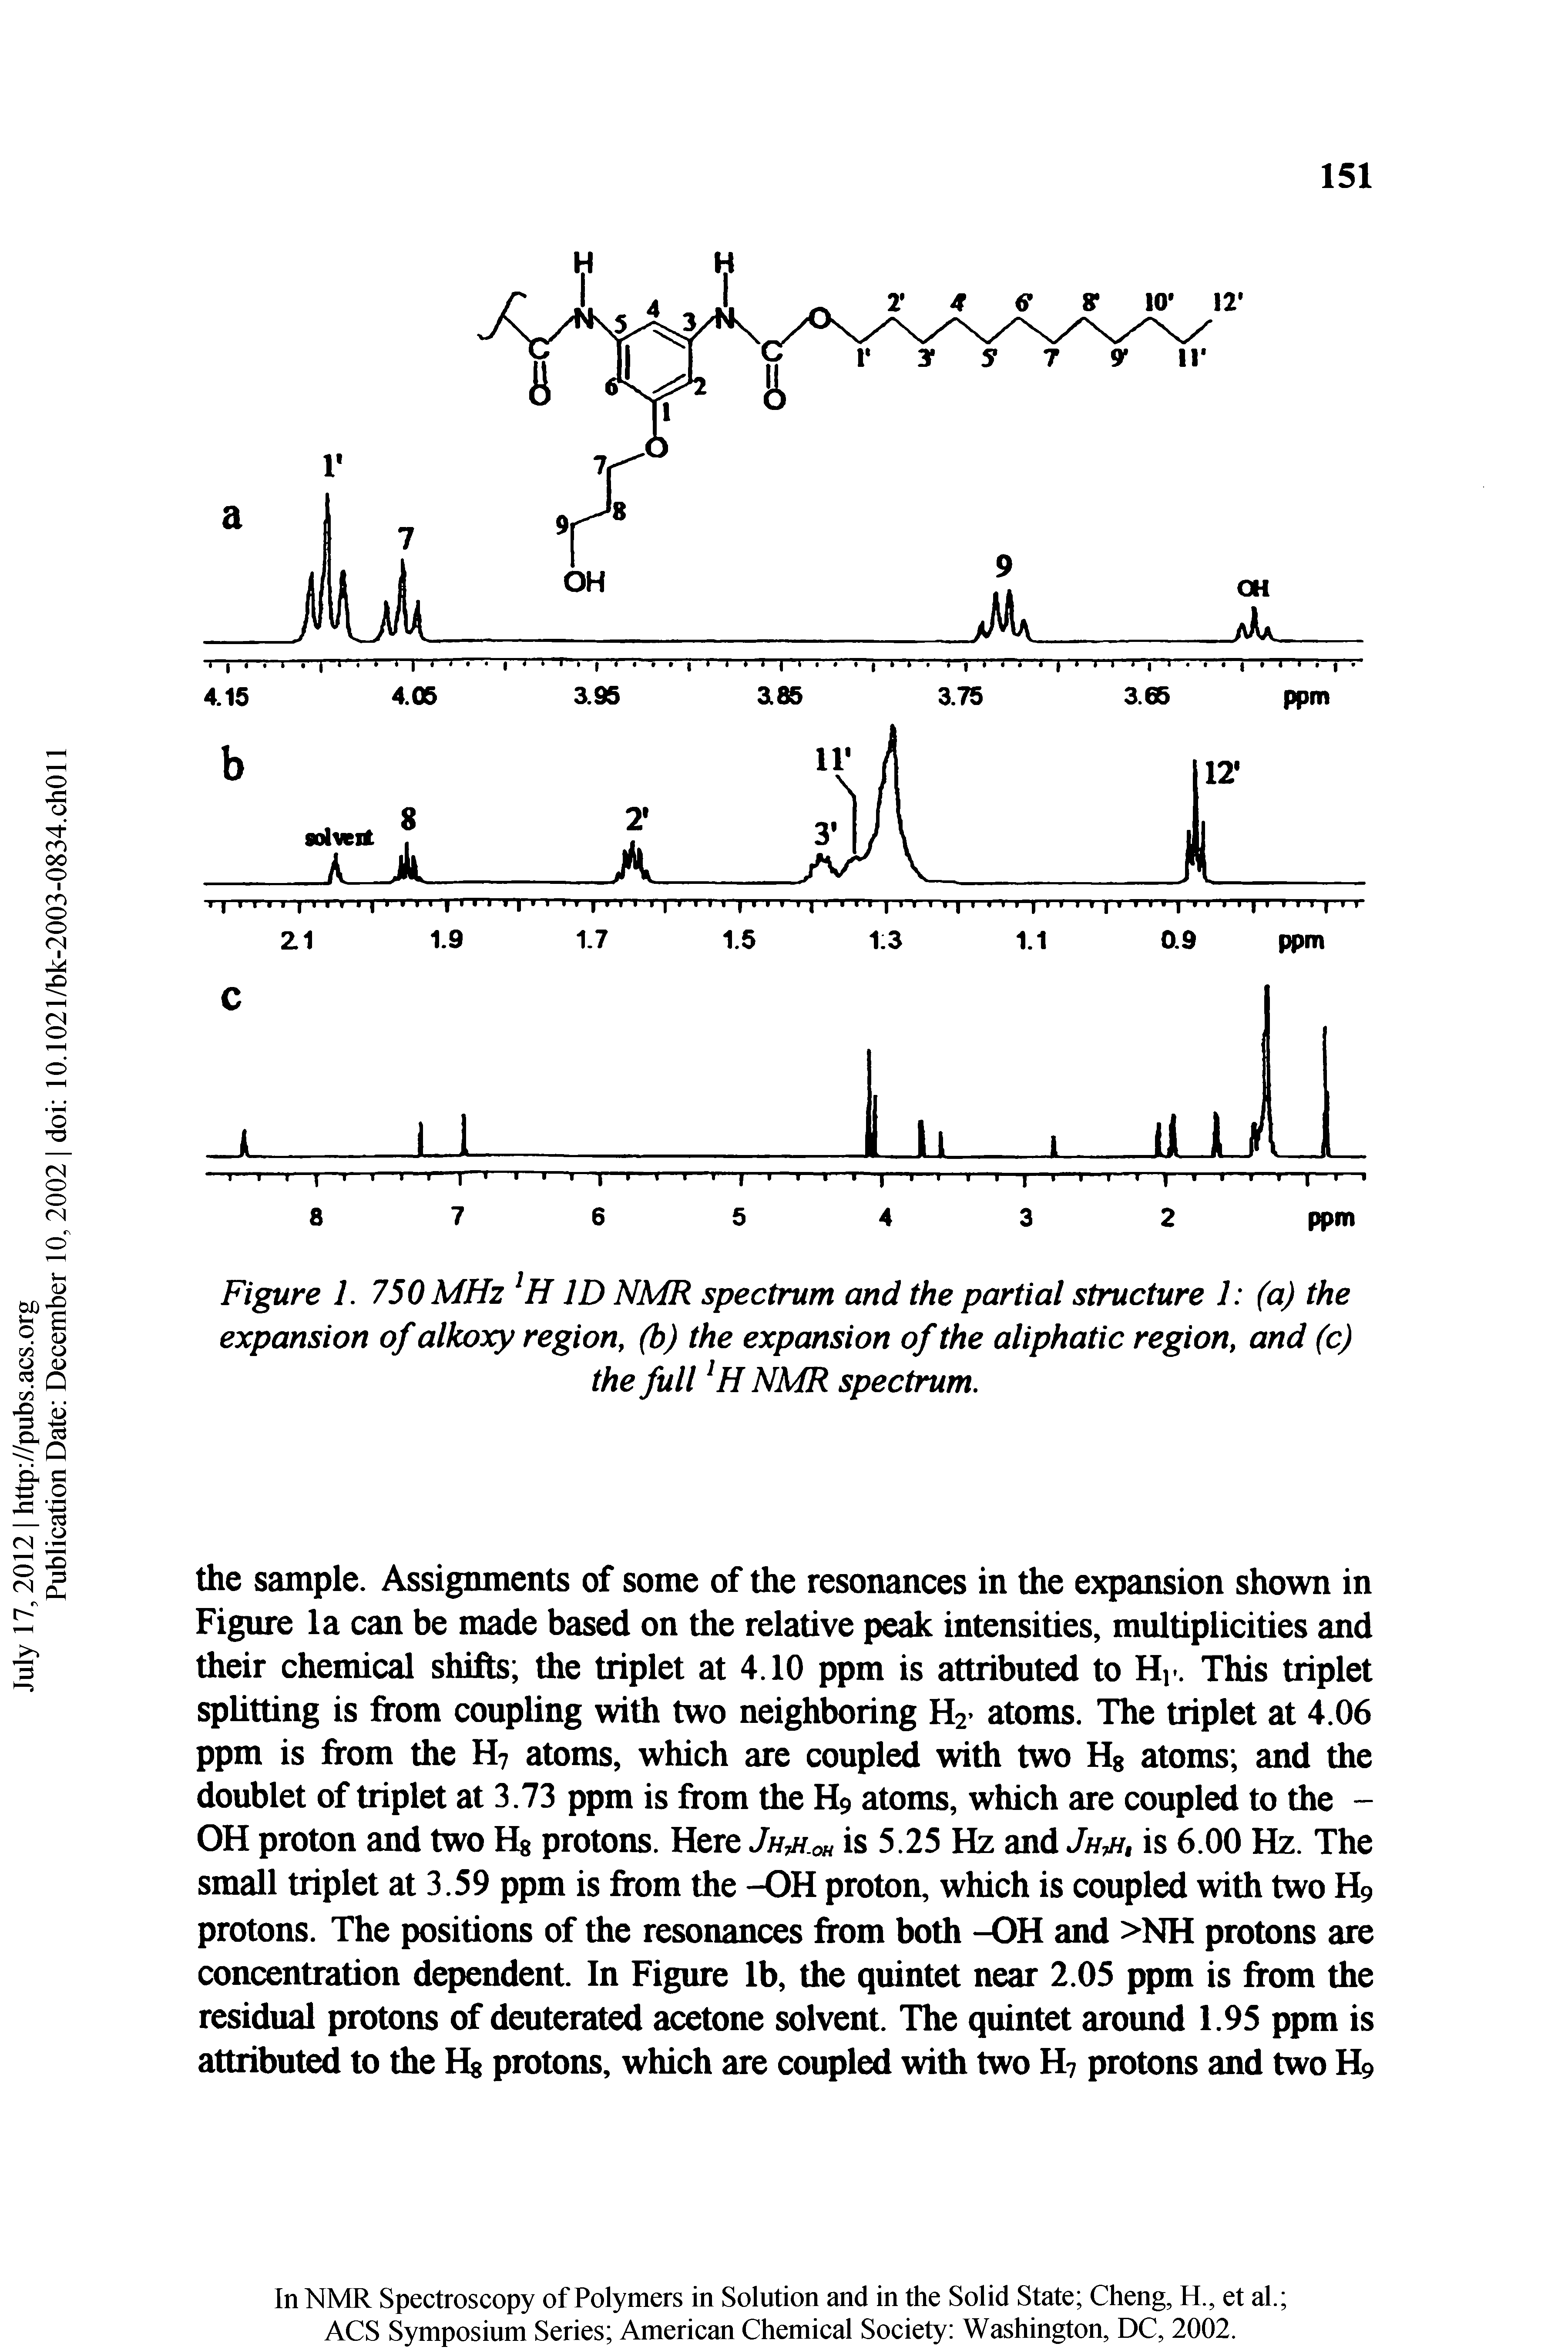 Figure 1. 750 MHz ID NMR spectrum and the partial structure 1 (a) the expansion of alkoxy region, (b) the expansion of the aliphatic region, and (c) the full NMR spectrum.